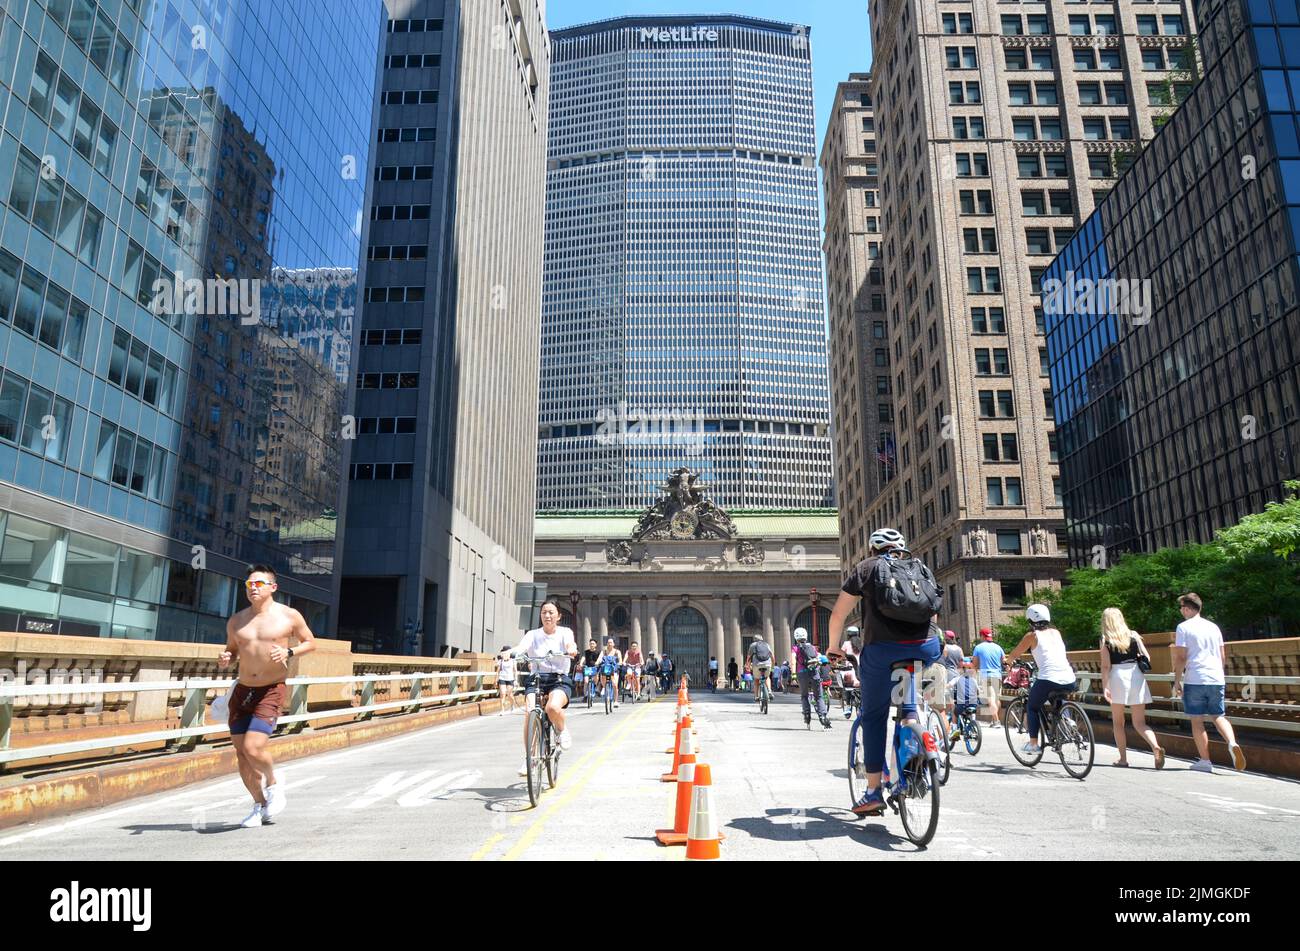 New Yorkers are seen walking and biking around Park Avenue during car free “Summer Streets” along Park Avenue in New York City. Stock Photo